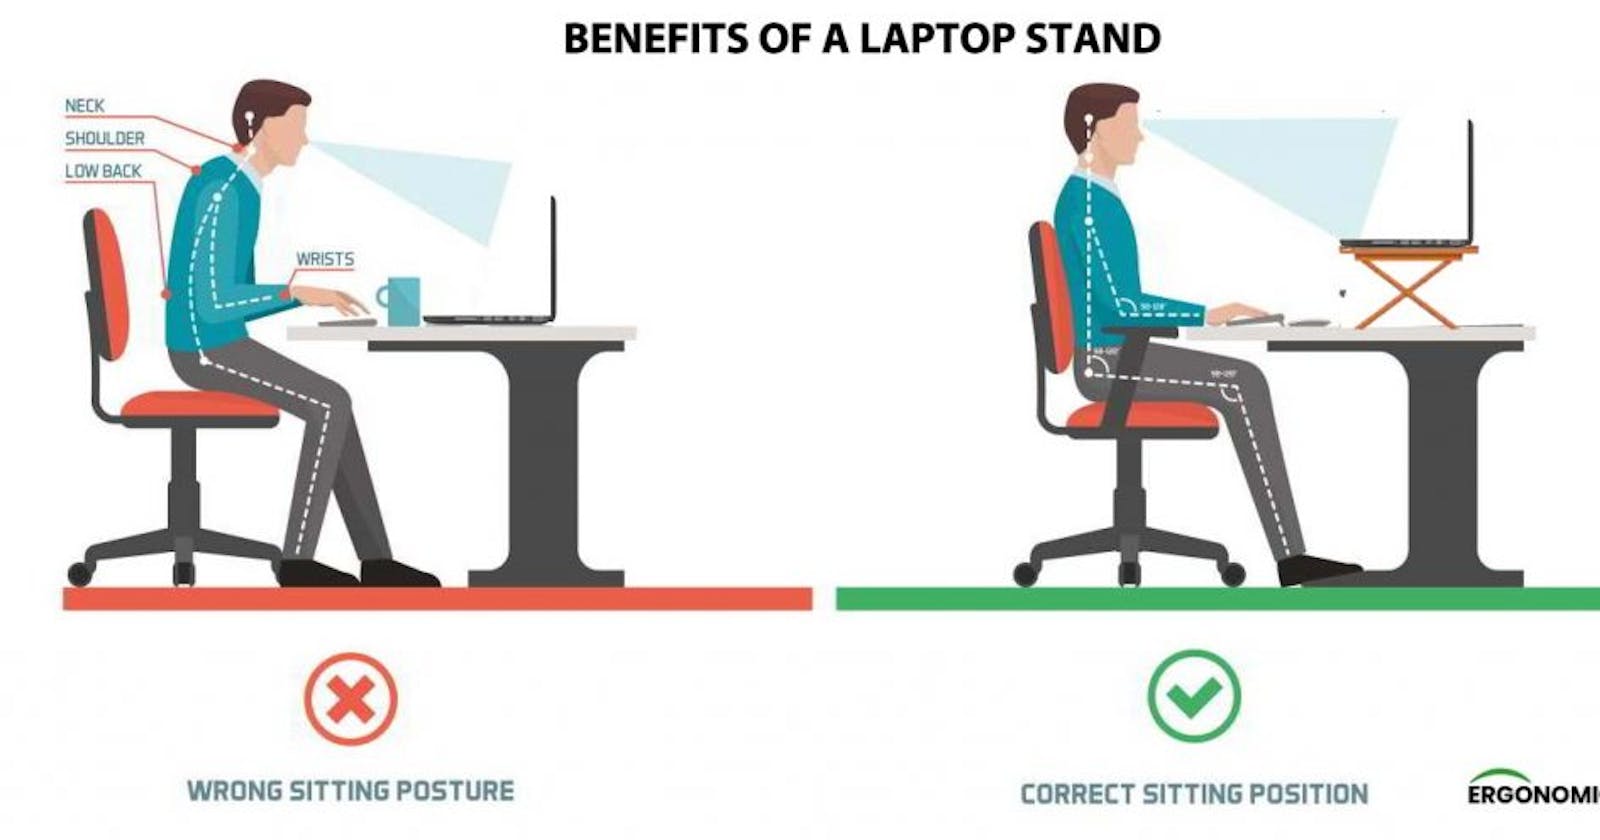 Ergonomics for Digital Nomads and laptop users in general